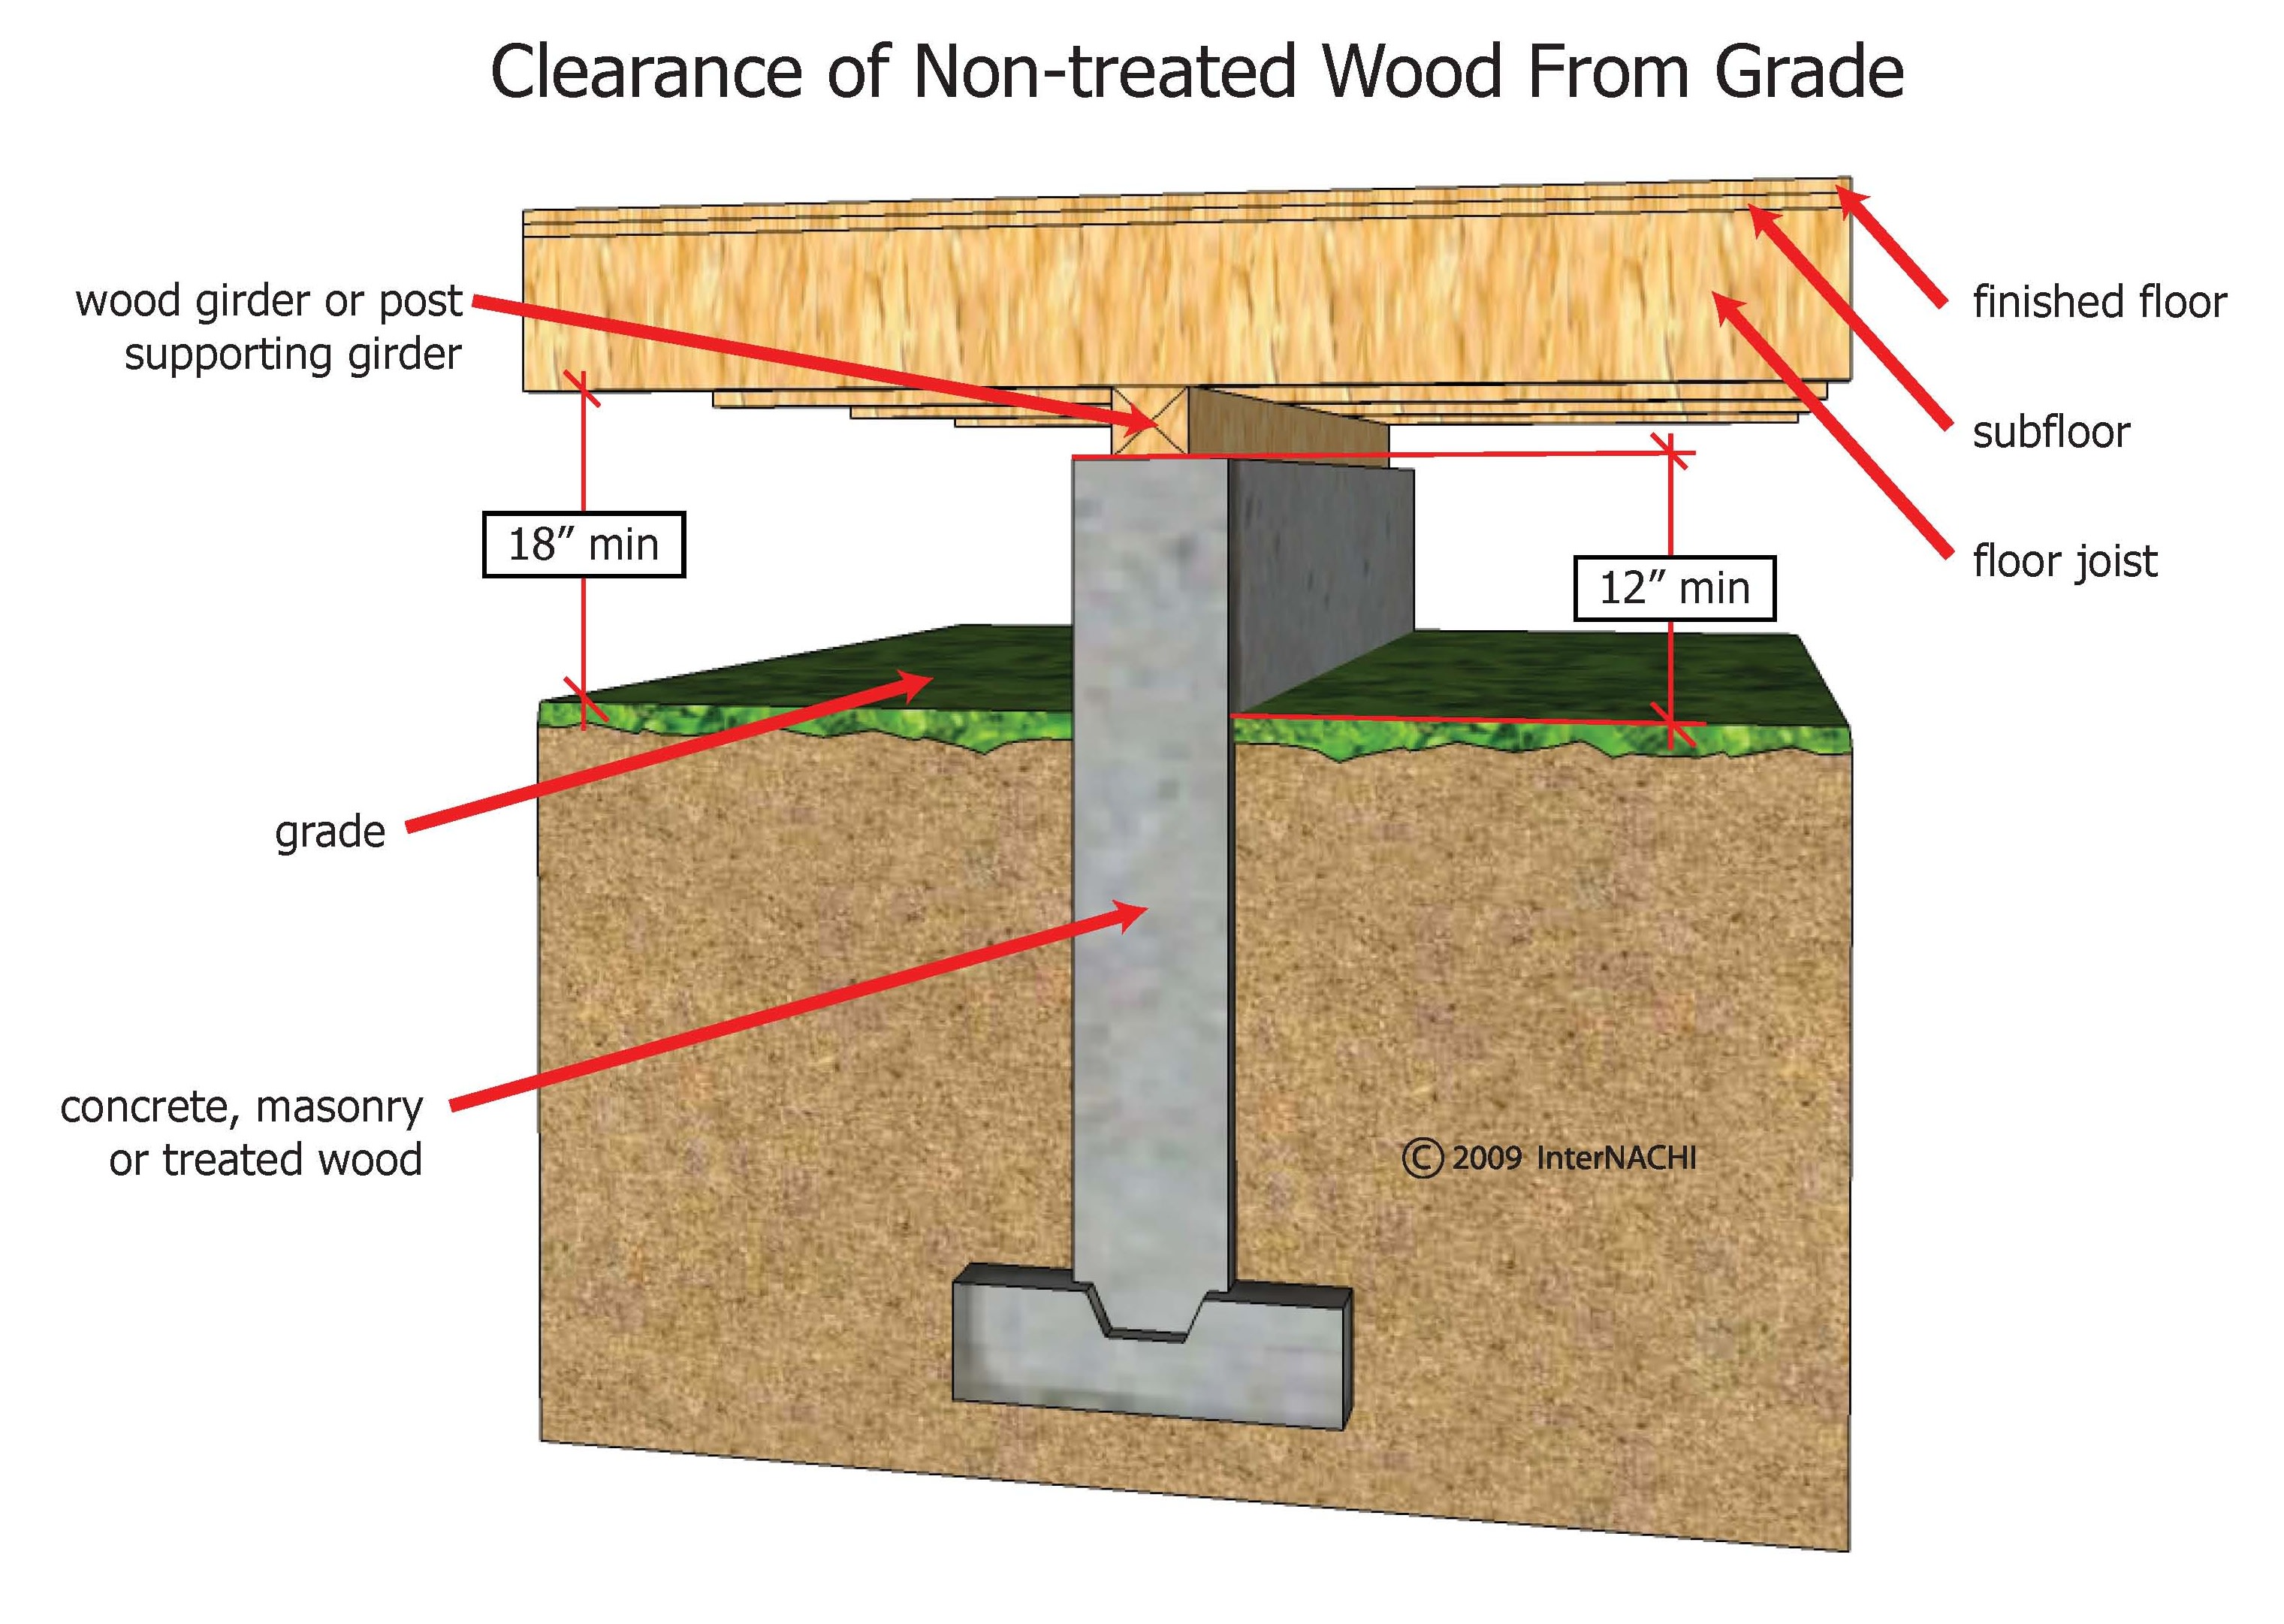 Clearance of non-treated wood from grade.